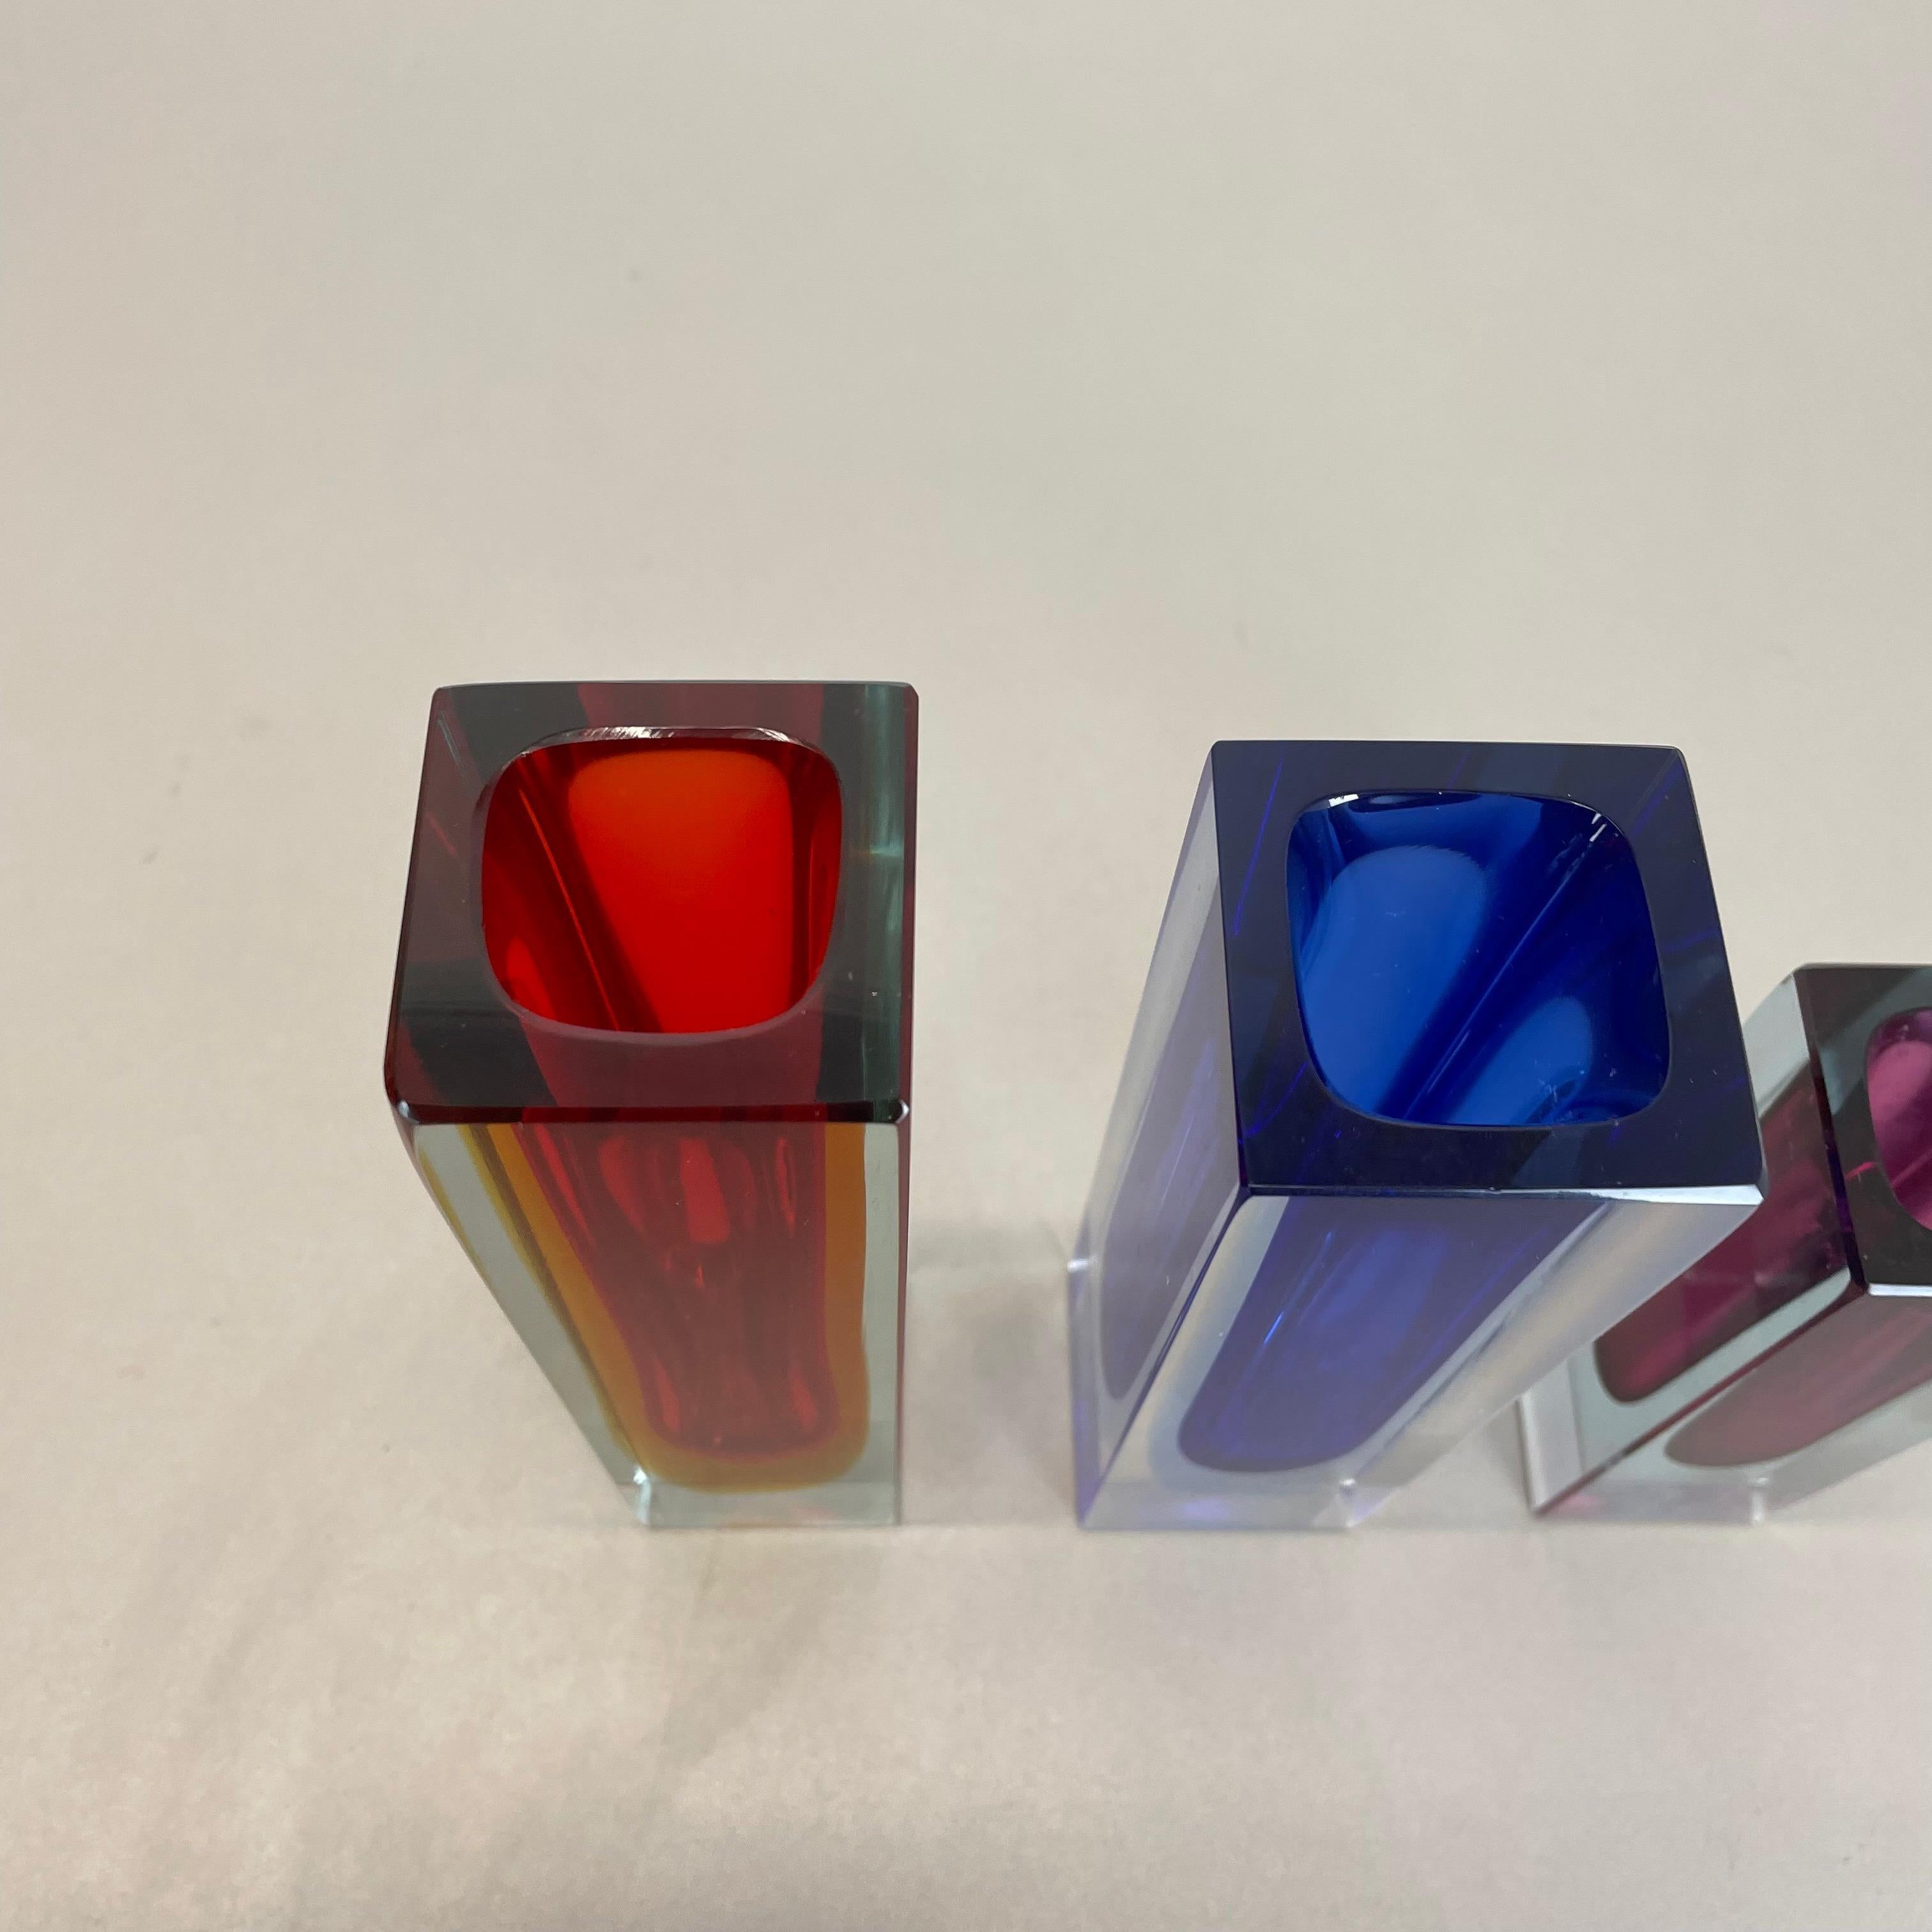 Italian Rare Set of 3 Multicolor Faceted Murano Glass Sommerso Cube Vases, Italy, 1970s For Sale